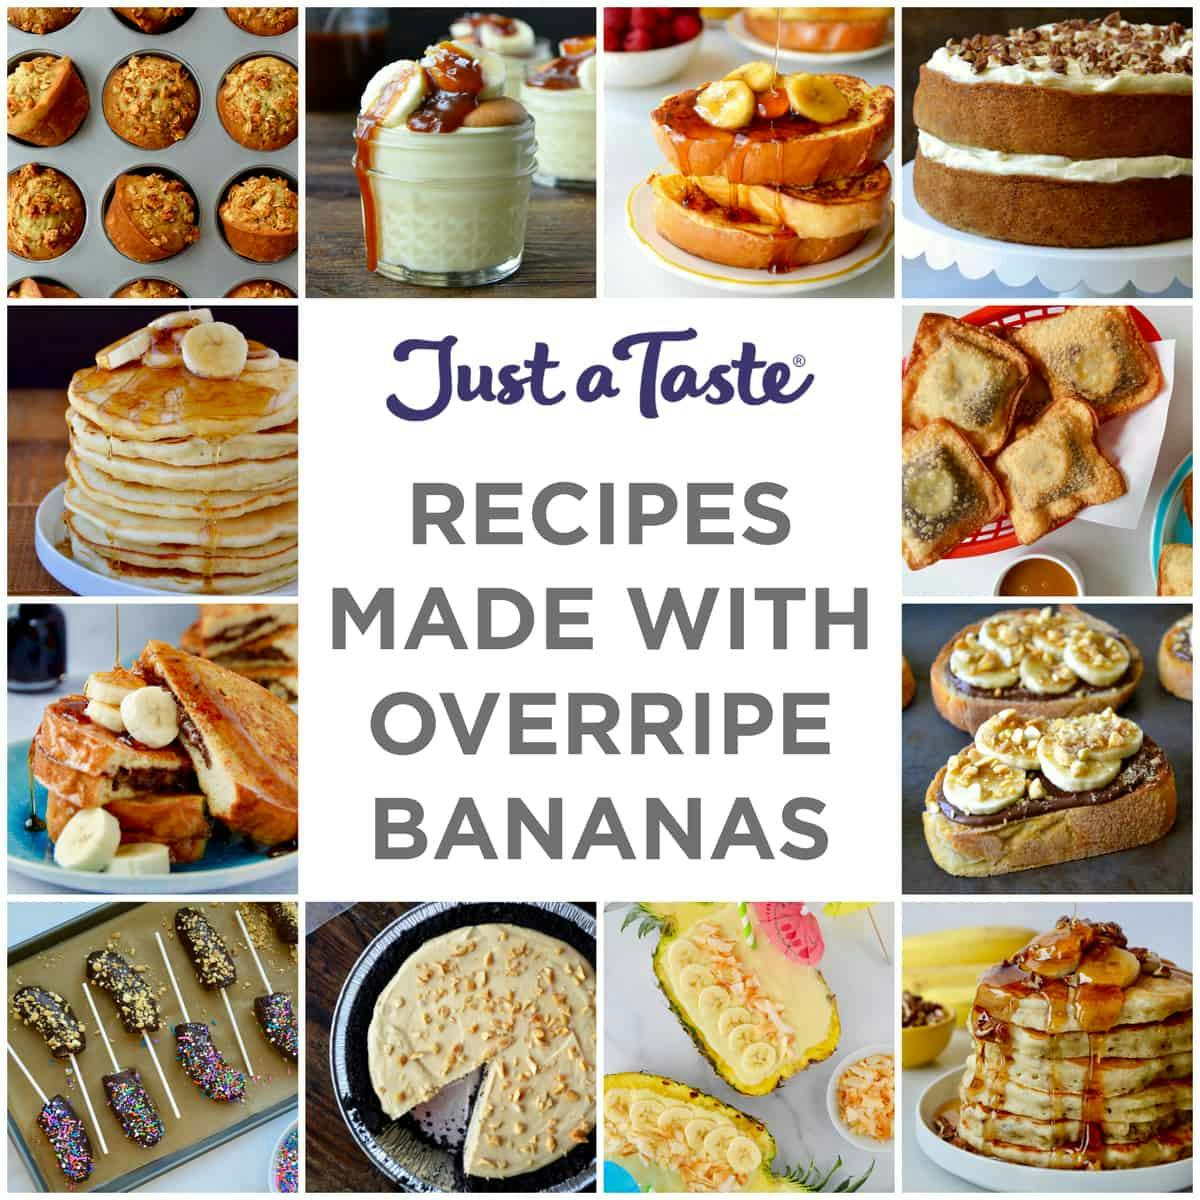 Collage of recipes from breakfast through dessert made with overripe bananas.